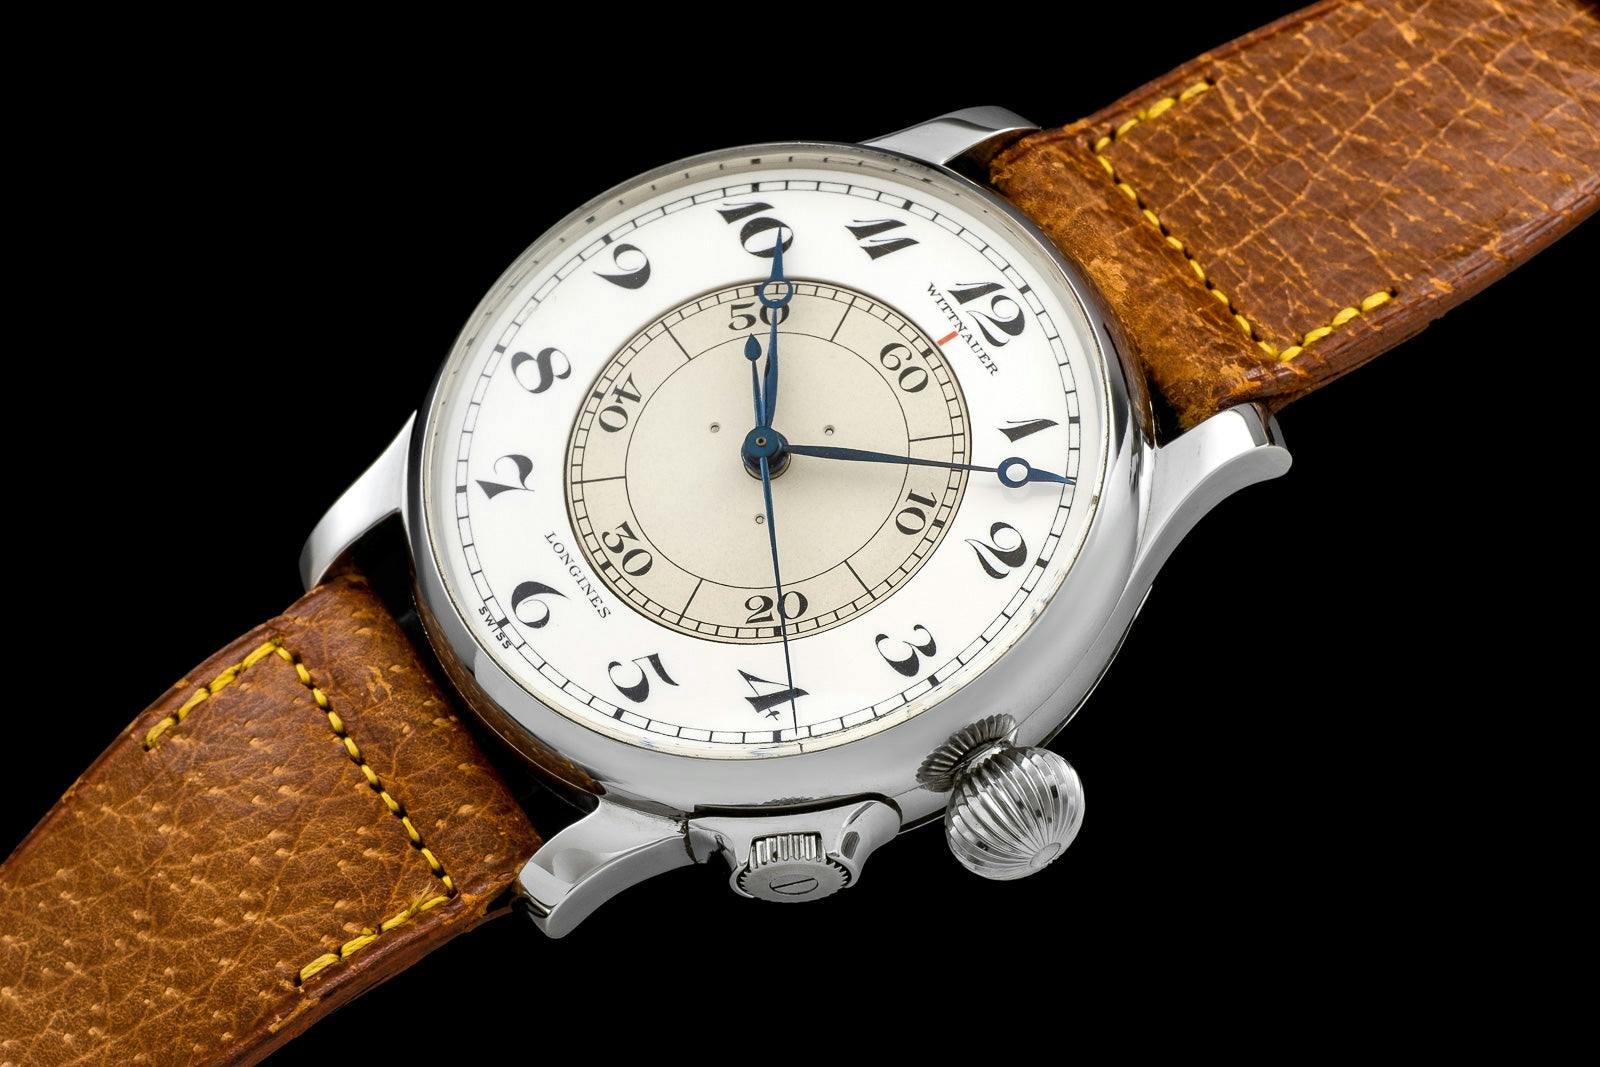 An original Weems designed centre seconds stopping watch from Wattnauer in the 1940s.